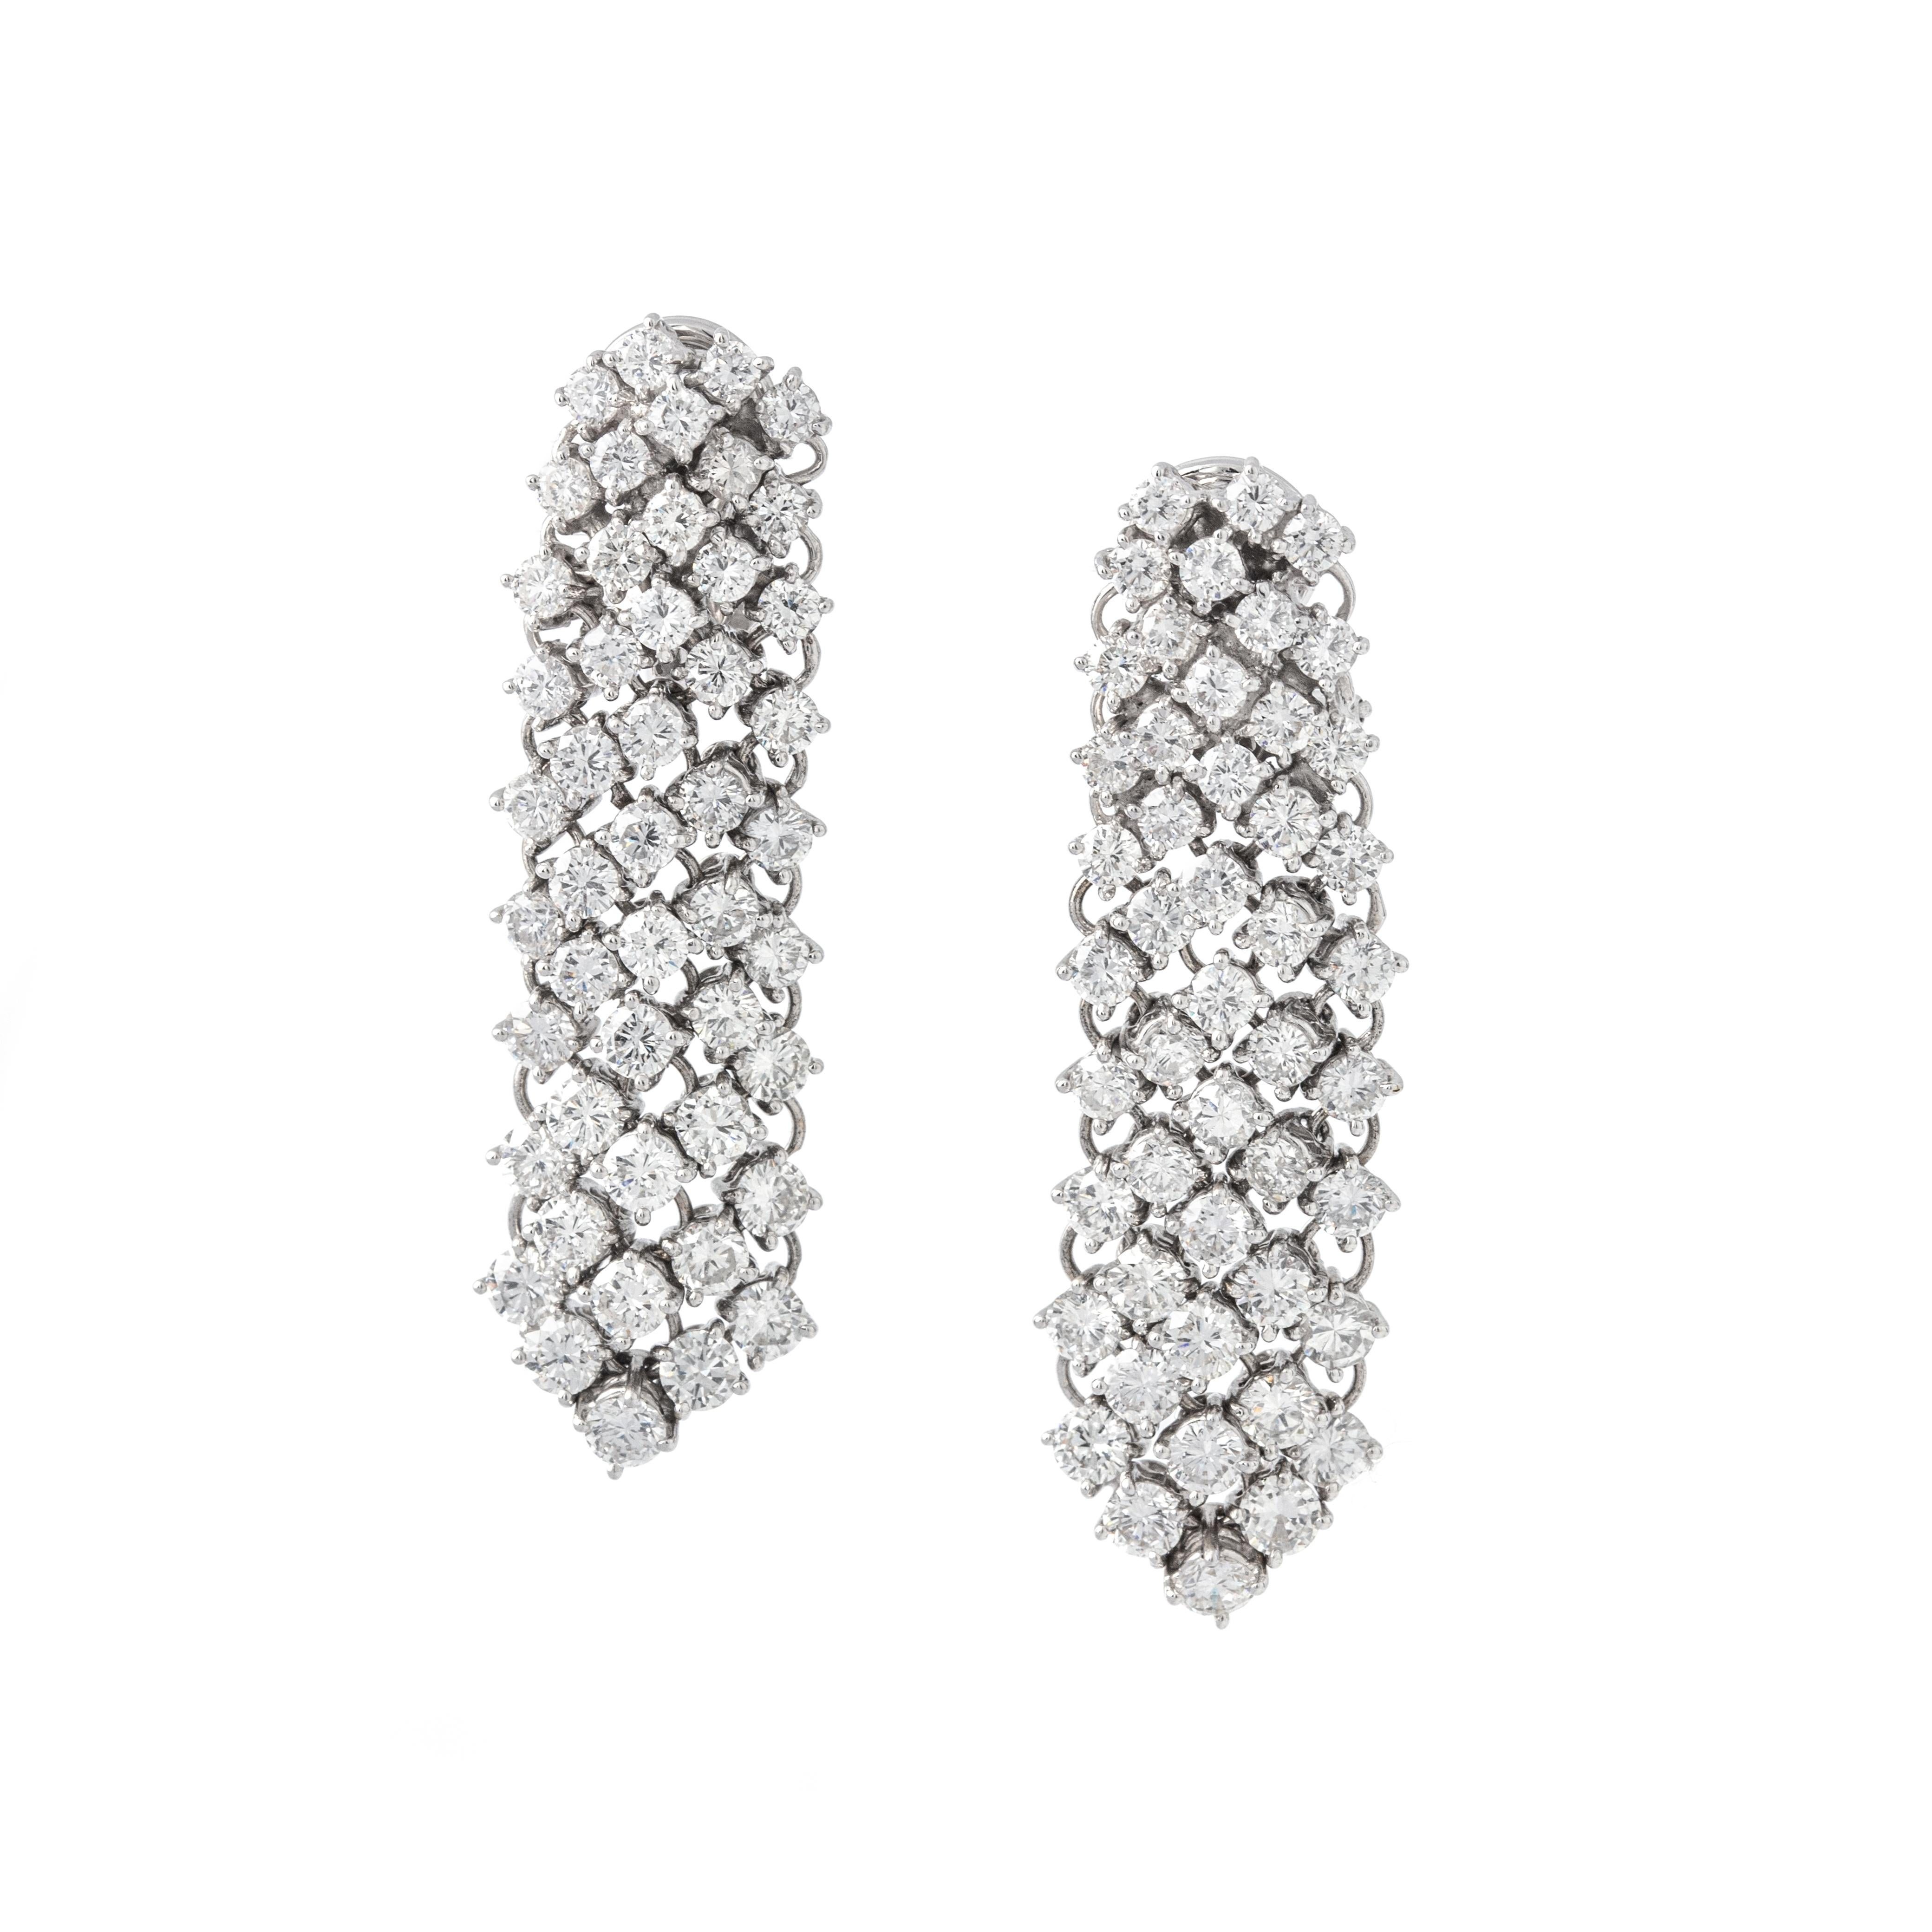 Introducing our Diamond 18K White Gold Earrings—an embodiment of opulence and sophistication.

Crafted in radiant 18K white gold, these earrings feature a dazzling array of 96 round-cut diamonds, collectively weighing 9.21 carats. The diamonds boast